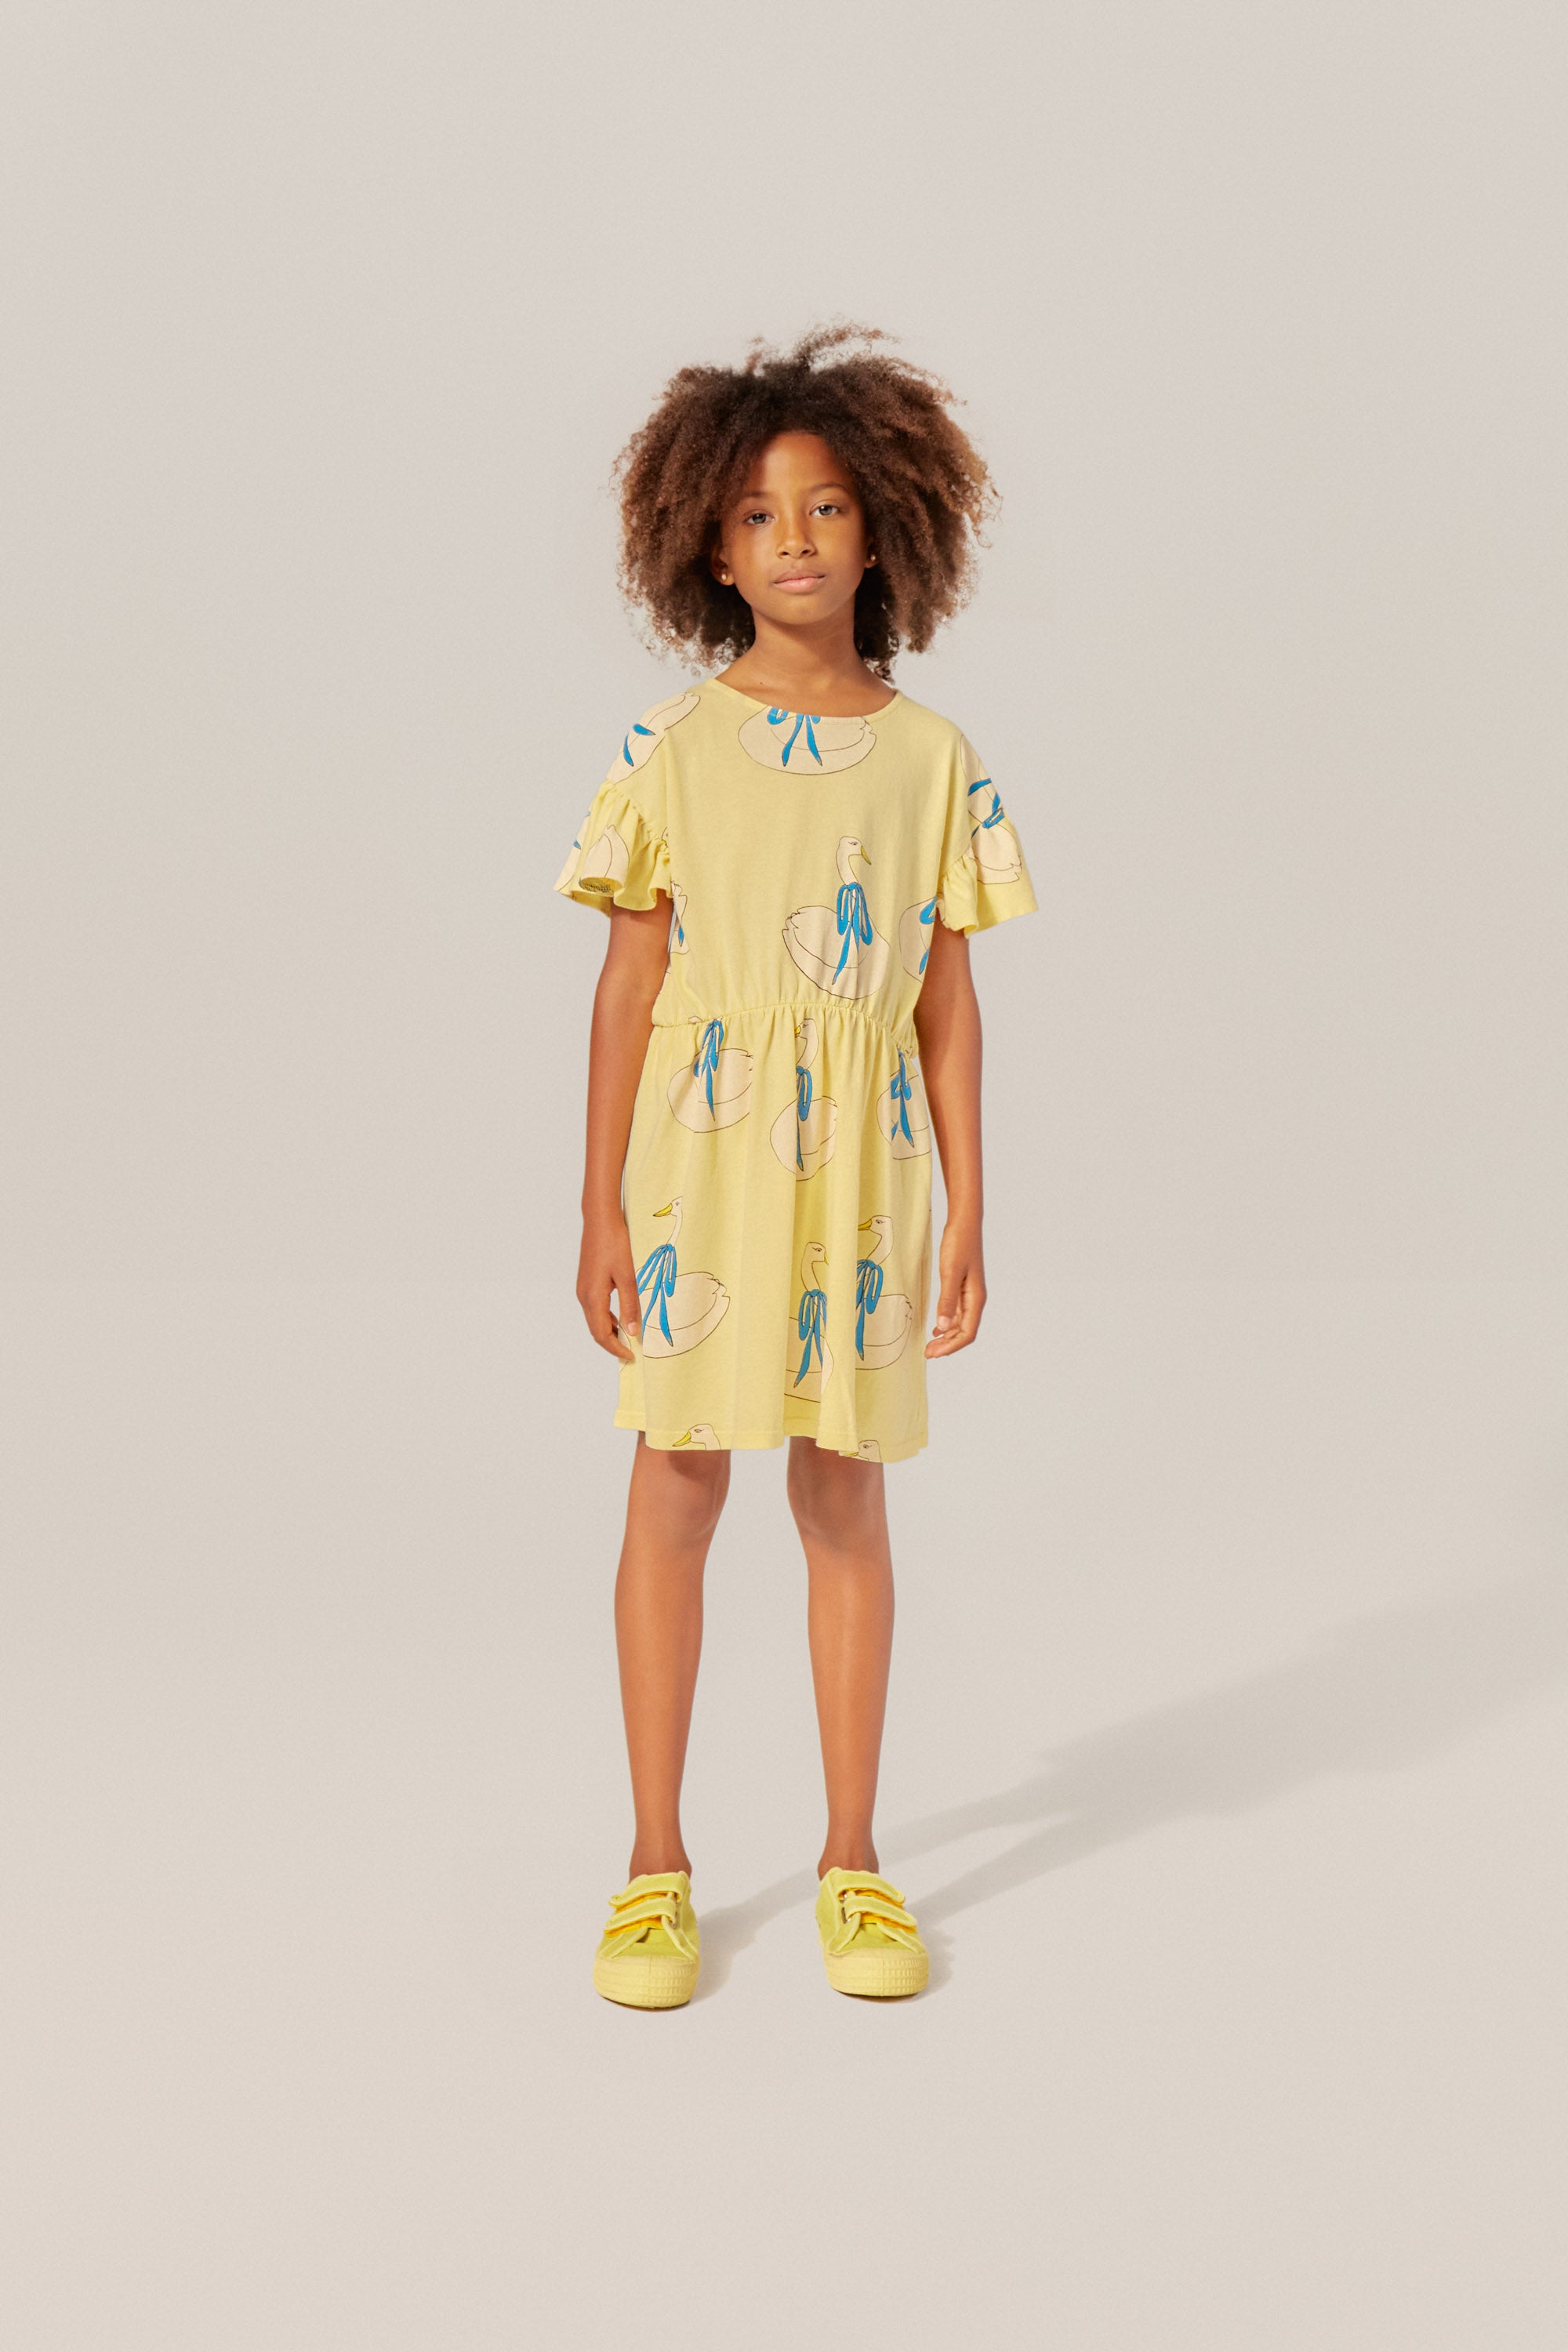 The Campamento - swans allover kids dress - yellow